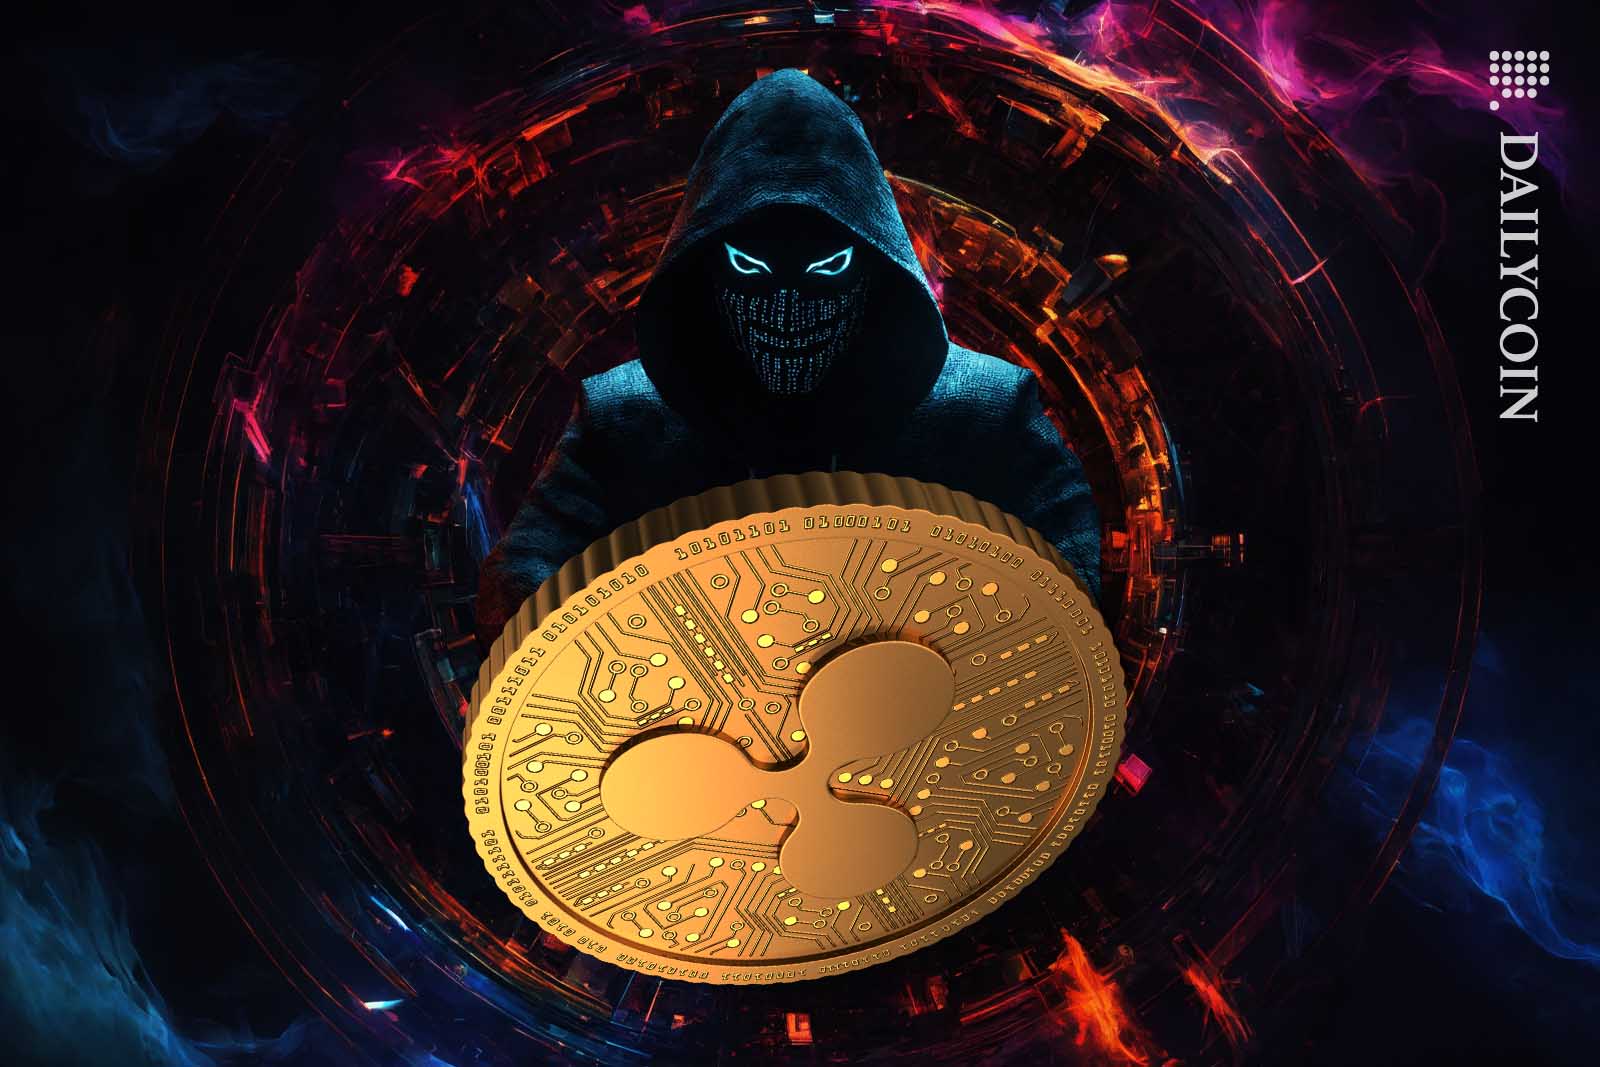 Evil faced hacker creature smiling behind a Ripple coin in a digital environment.